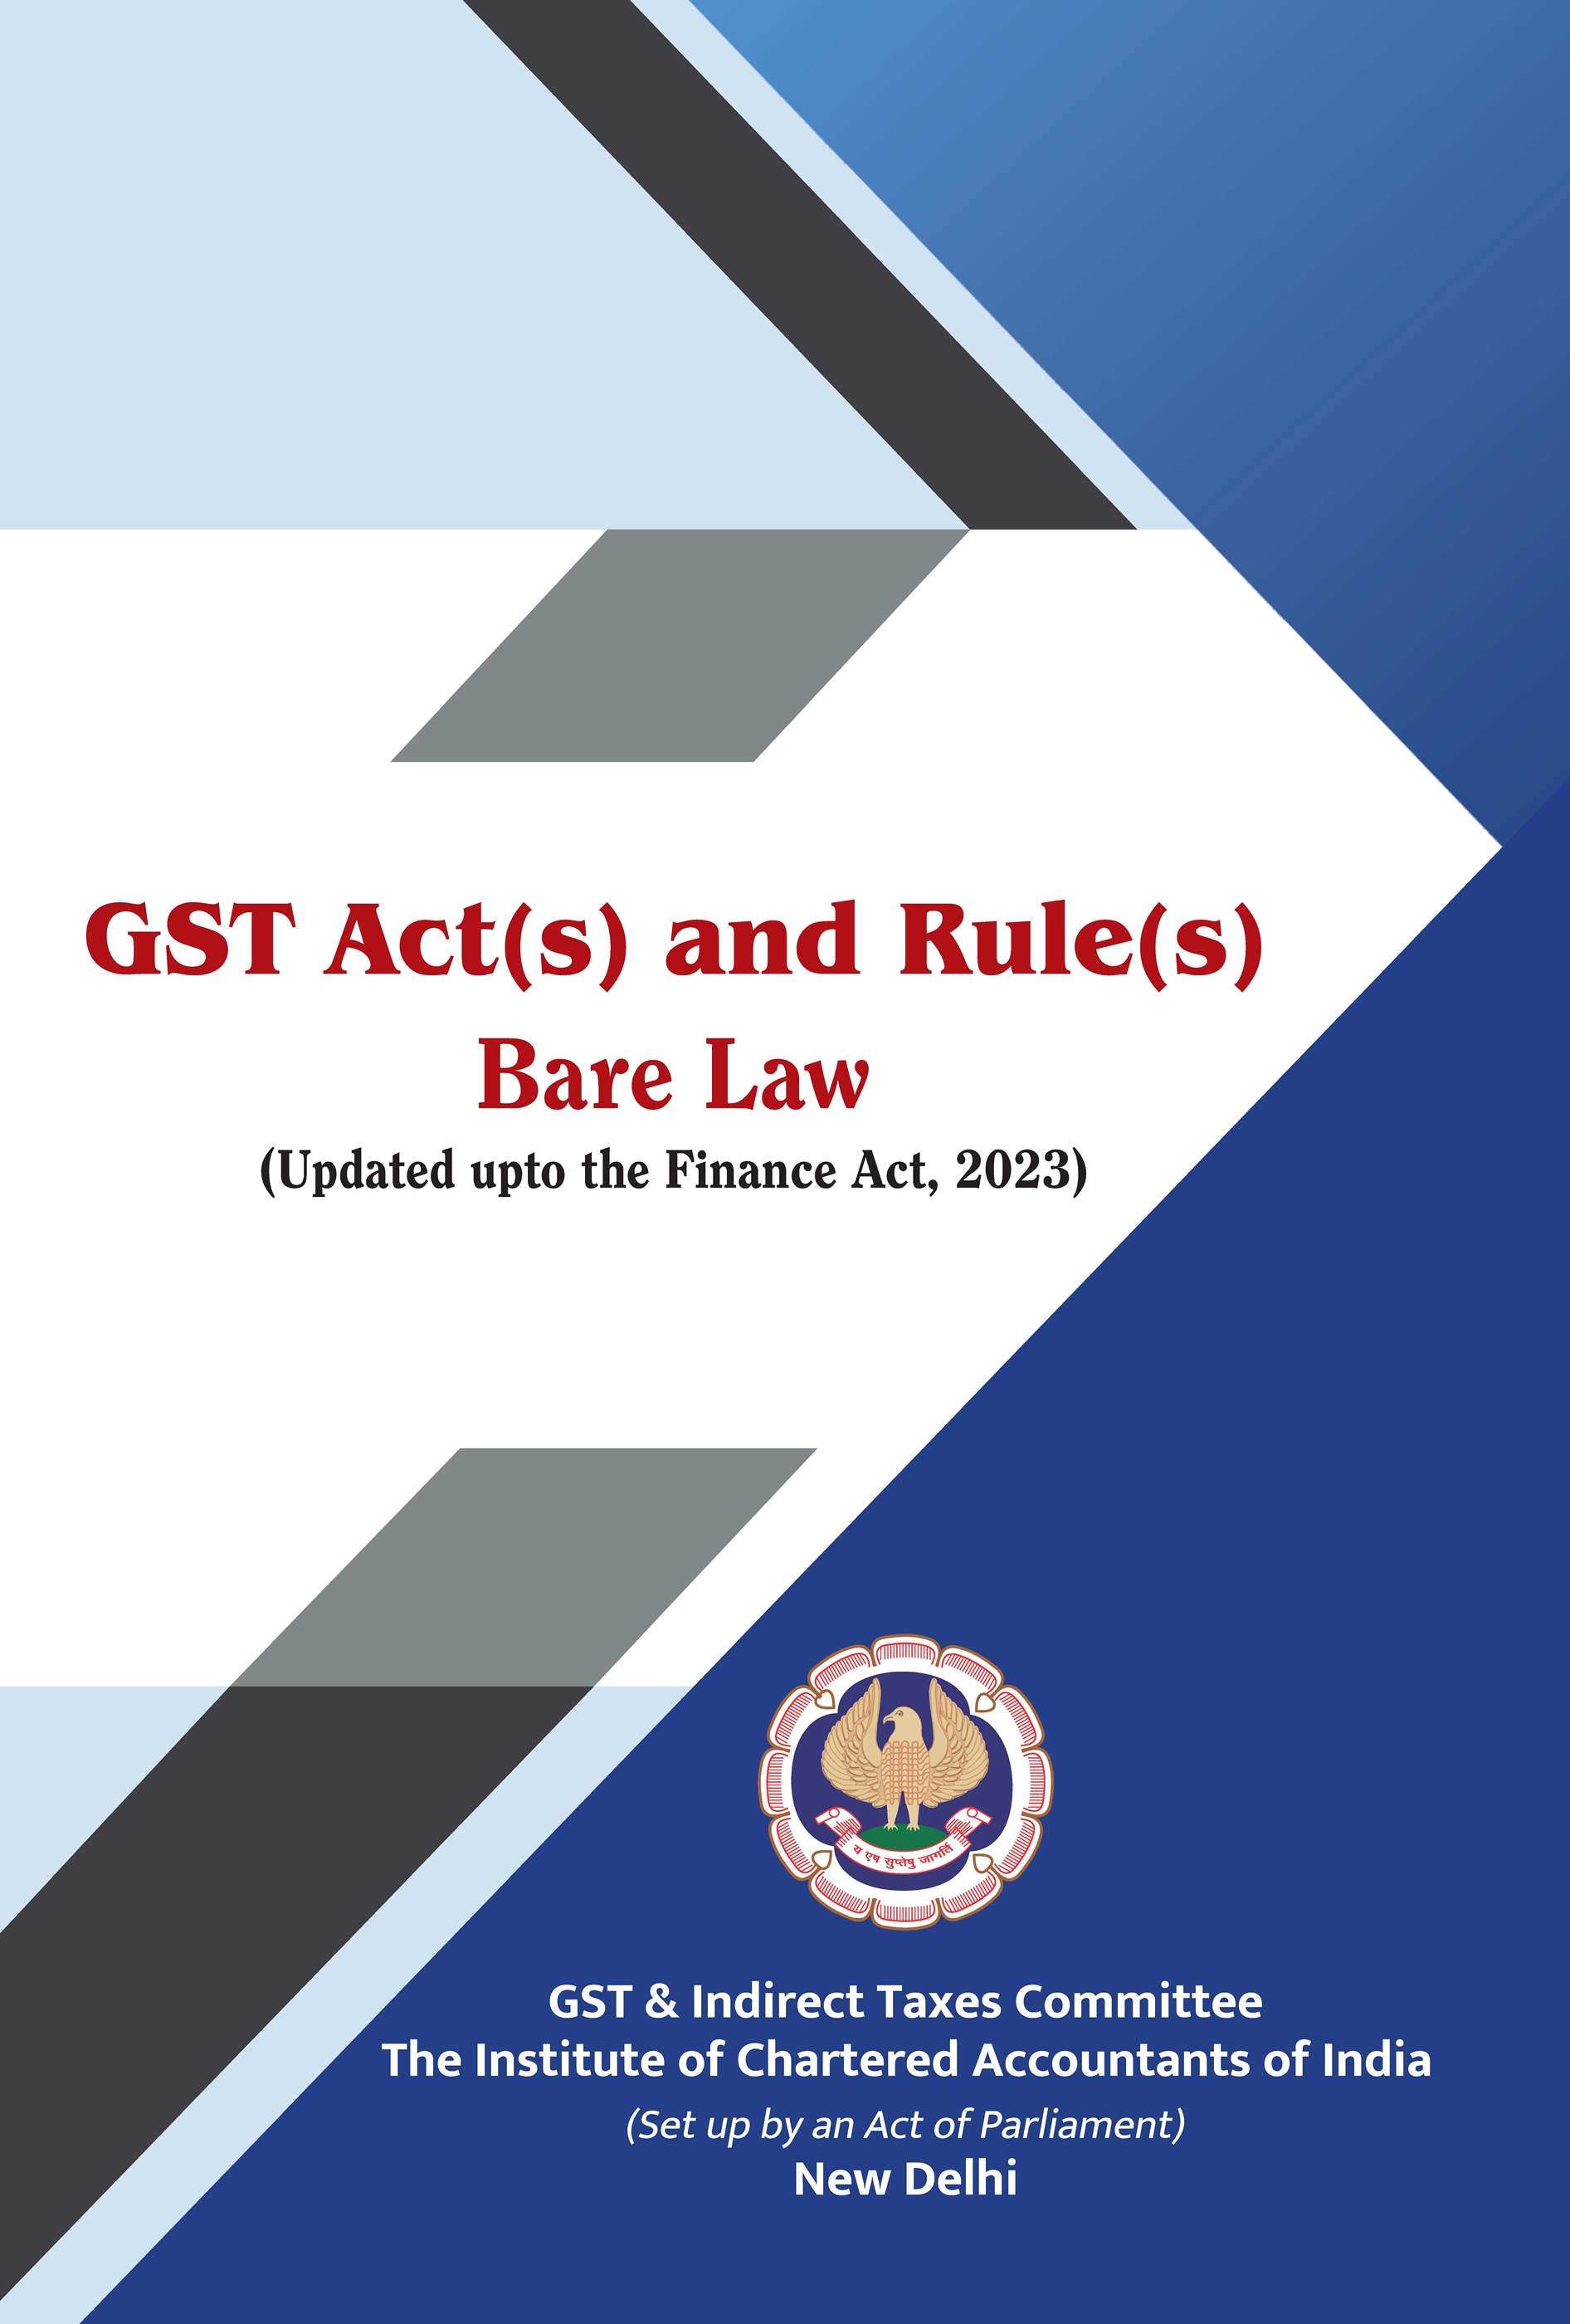 GST Act(s) and Rule(s) - Bare Law (Updated upto the Finance Act, 2023) Edition - April, 2023